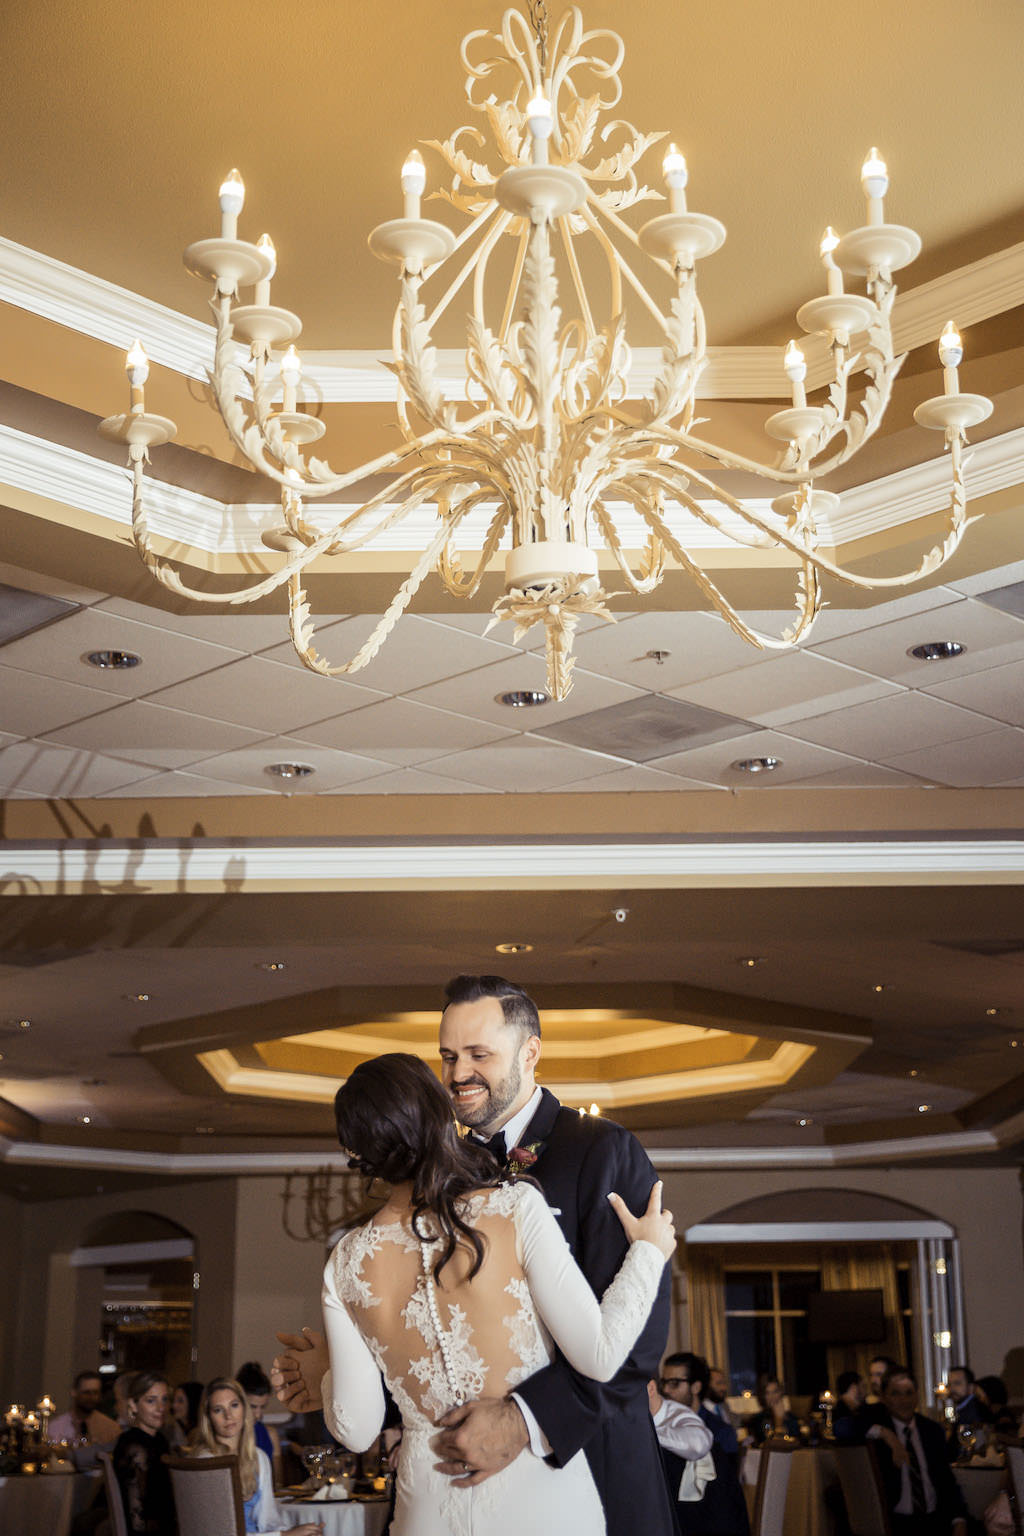 Bride and Groom Ballroom Wedding Ceremony First Dance Portrait | St. Petersburg Waterfront Venue Isla Del Sol Yacht and Country Club